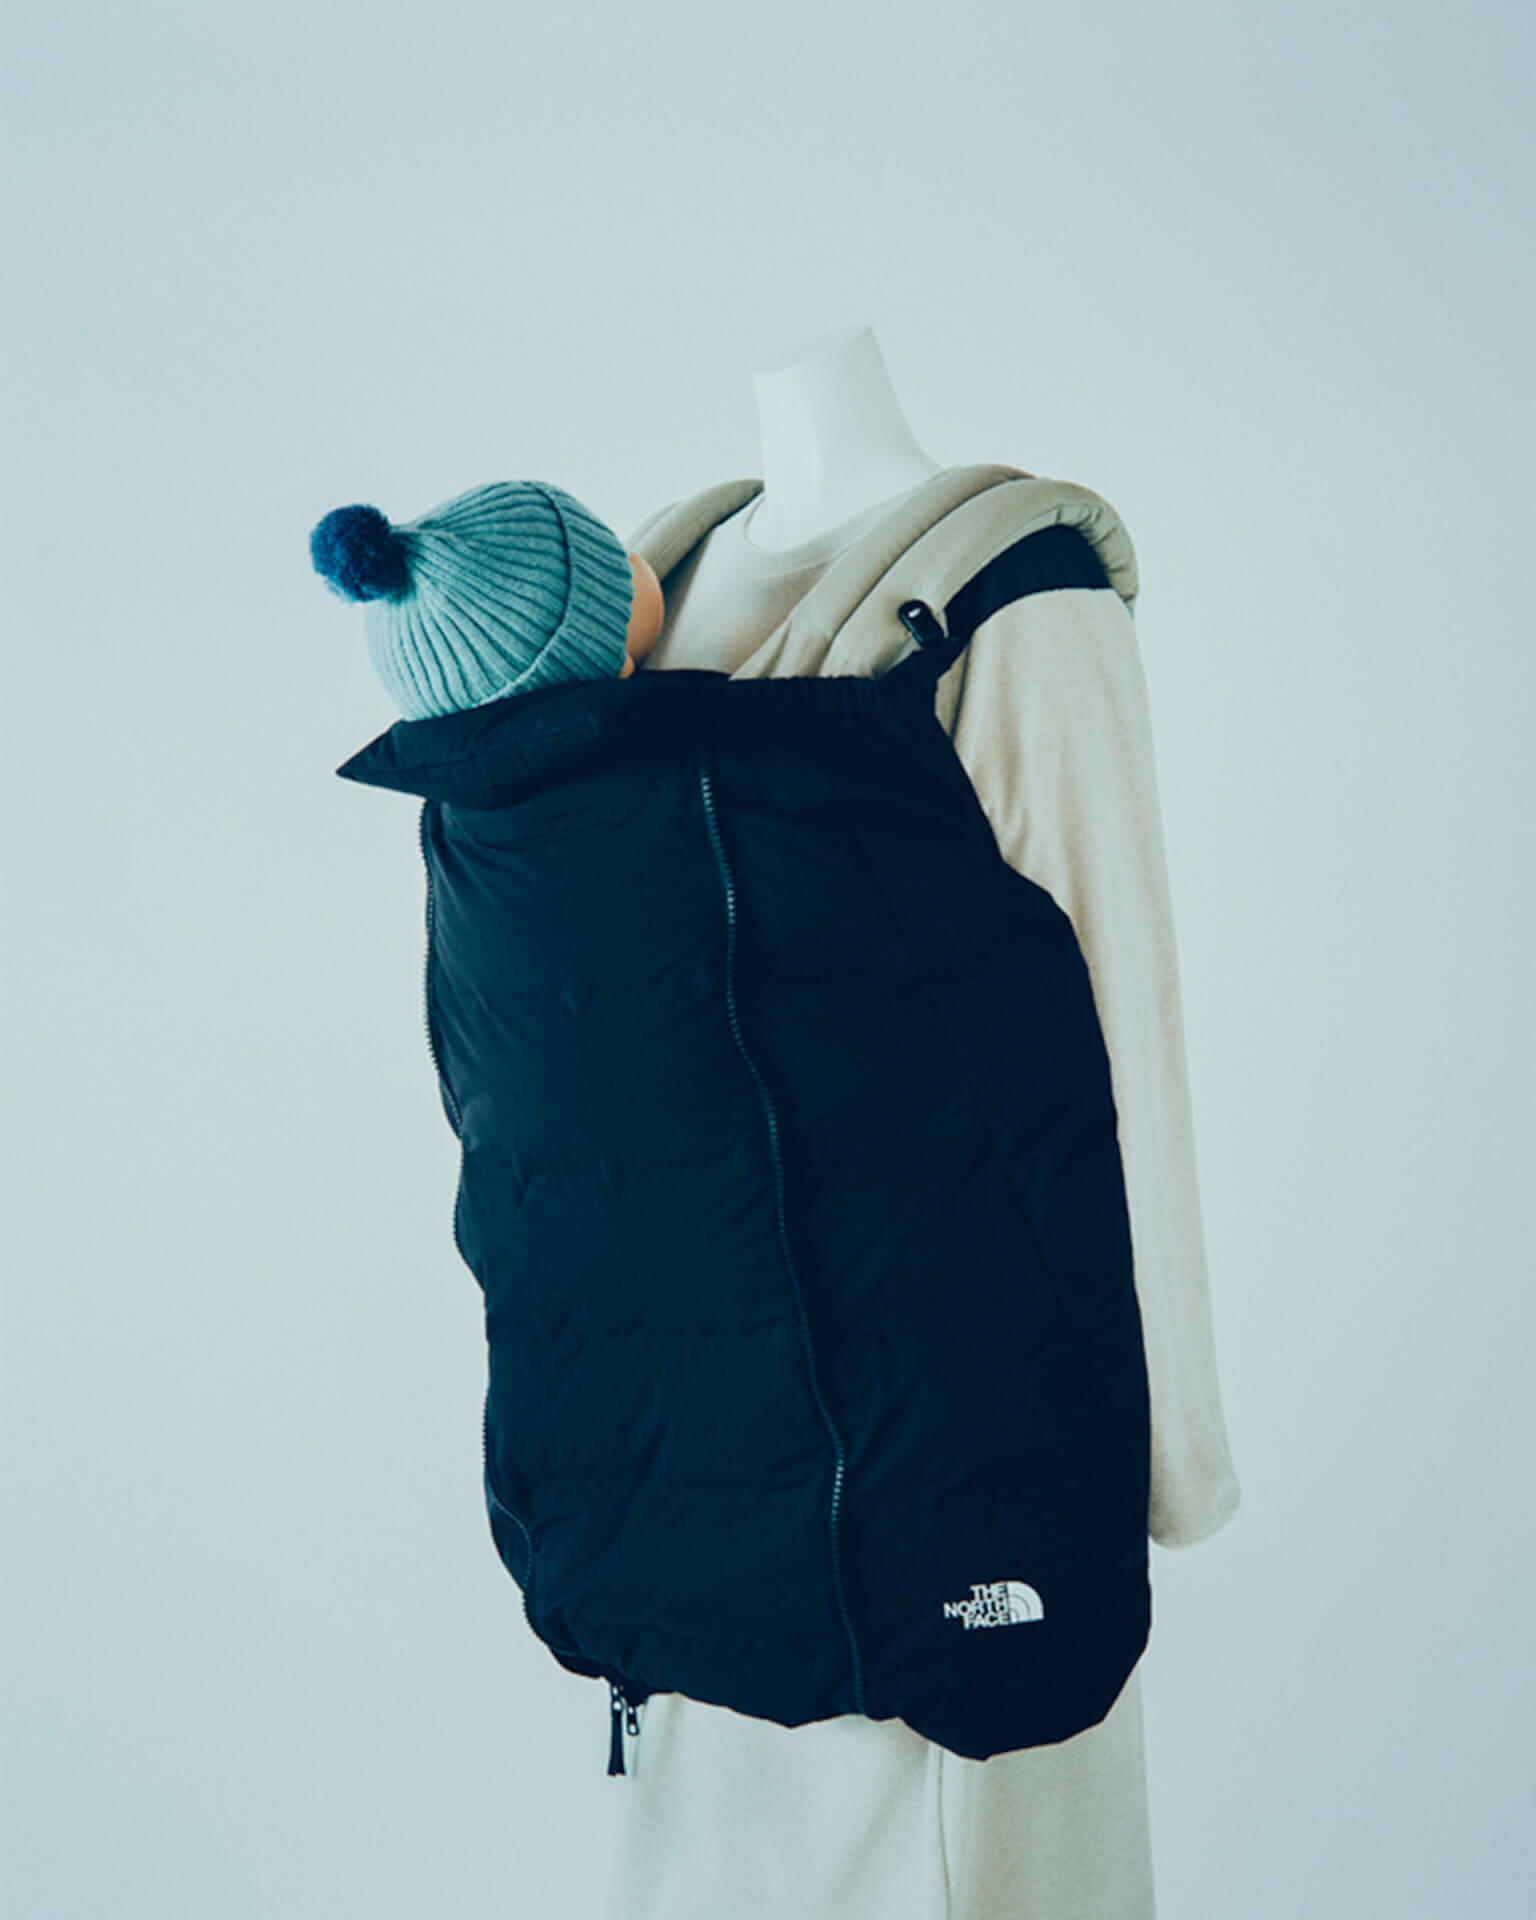 THE NORTH FACE、ママに優しい機能的マタニティウェアを6型展開で発売 | Qetic